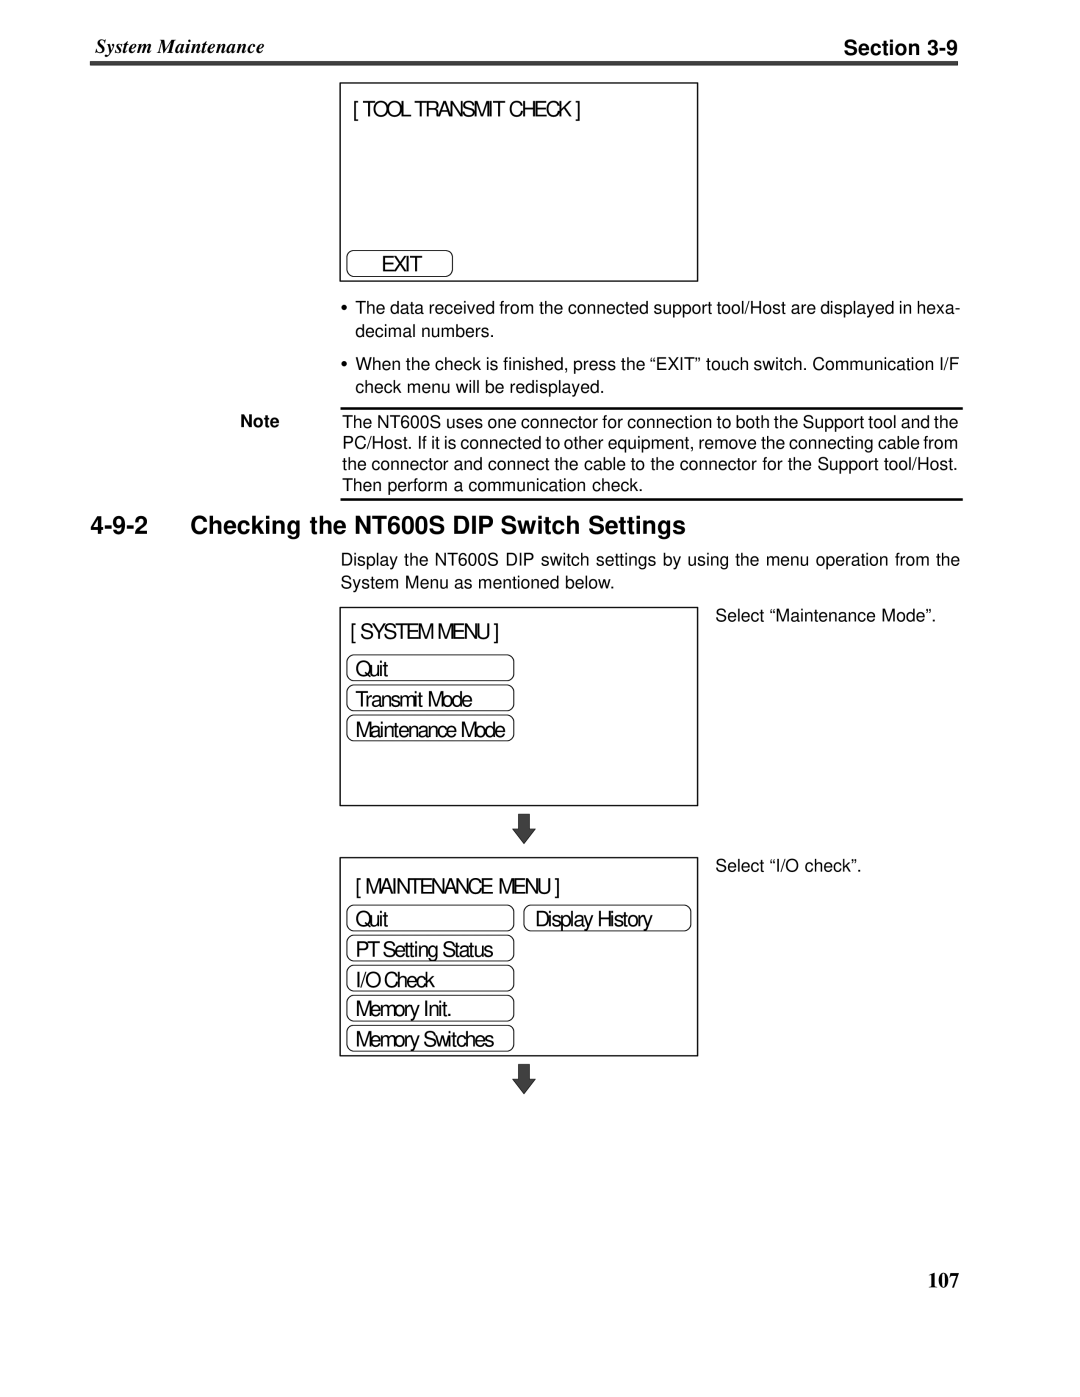 Omron V022-E3-1 operation manual 4-9-2Checking the NT600S DIP Switch Settings, Section 